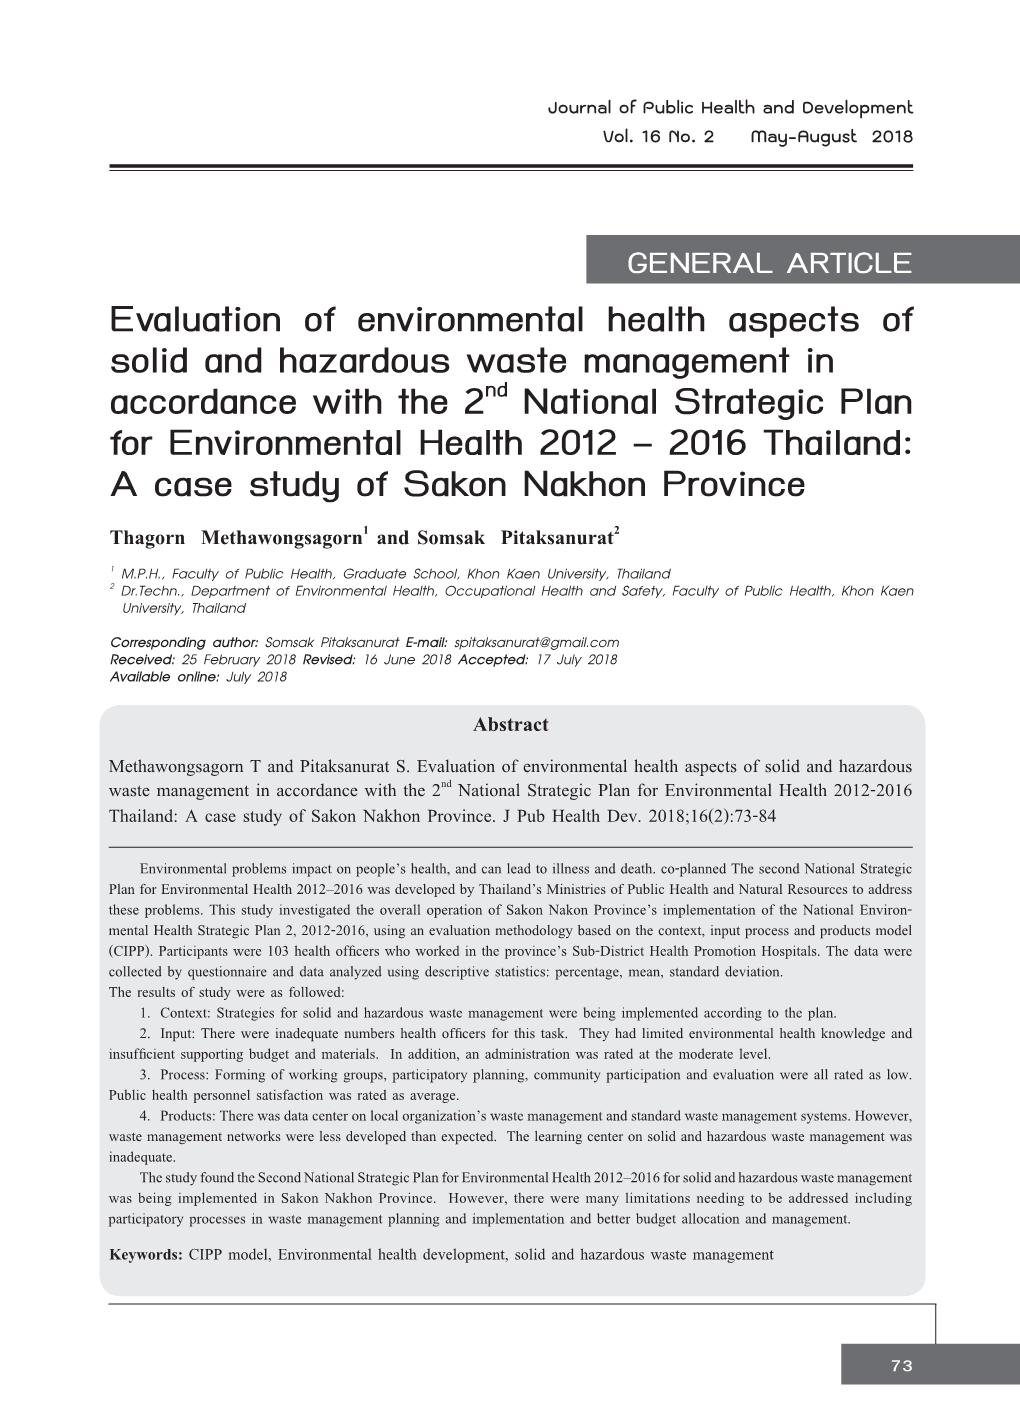 Evaluation of Environmental Health Aspects of Solid and Hazardous